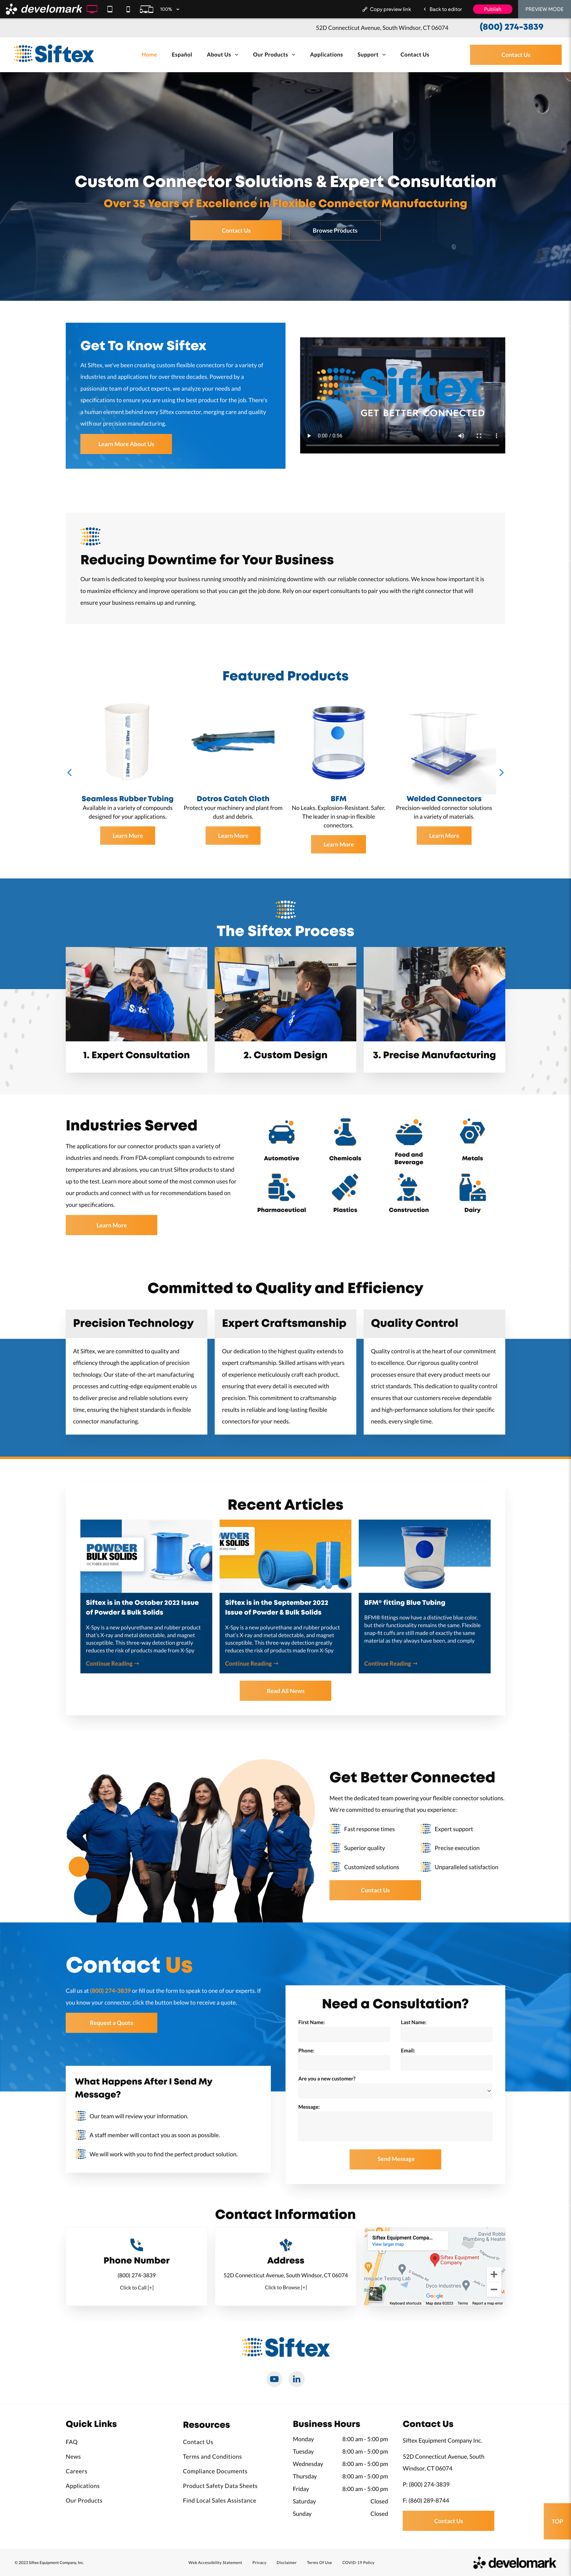 Siftex Equipment Company home page 